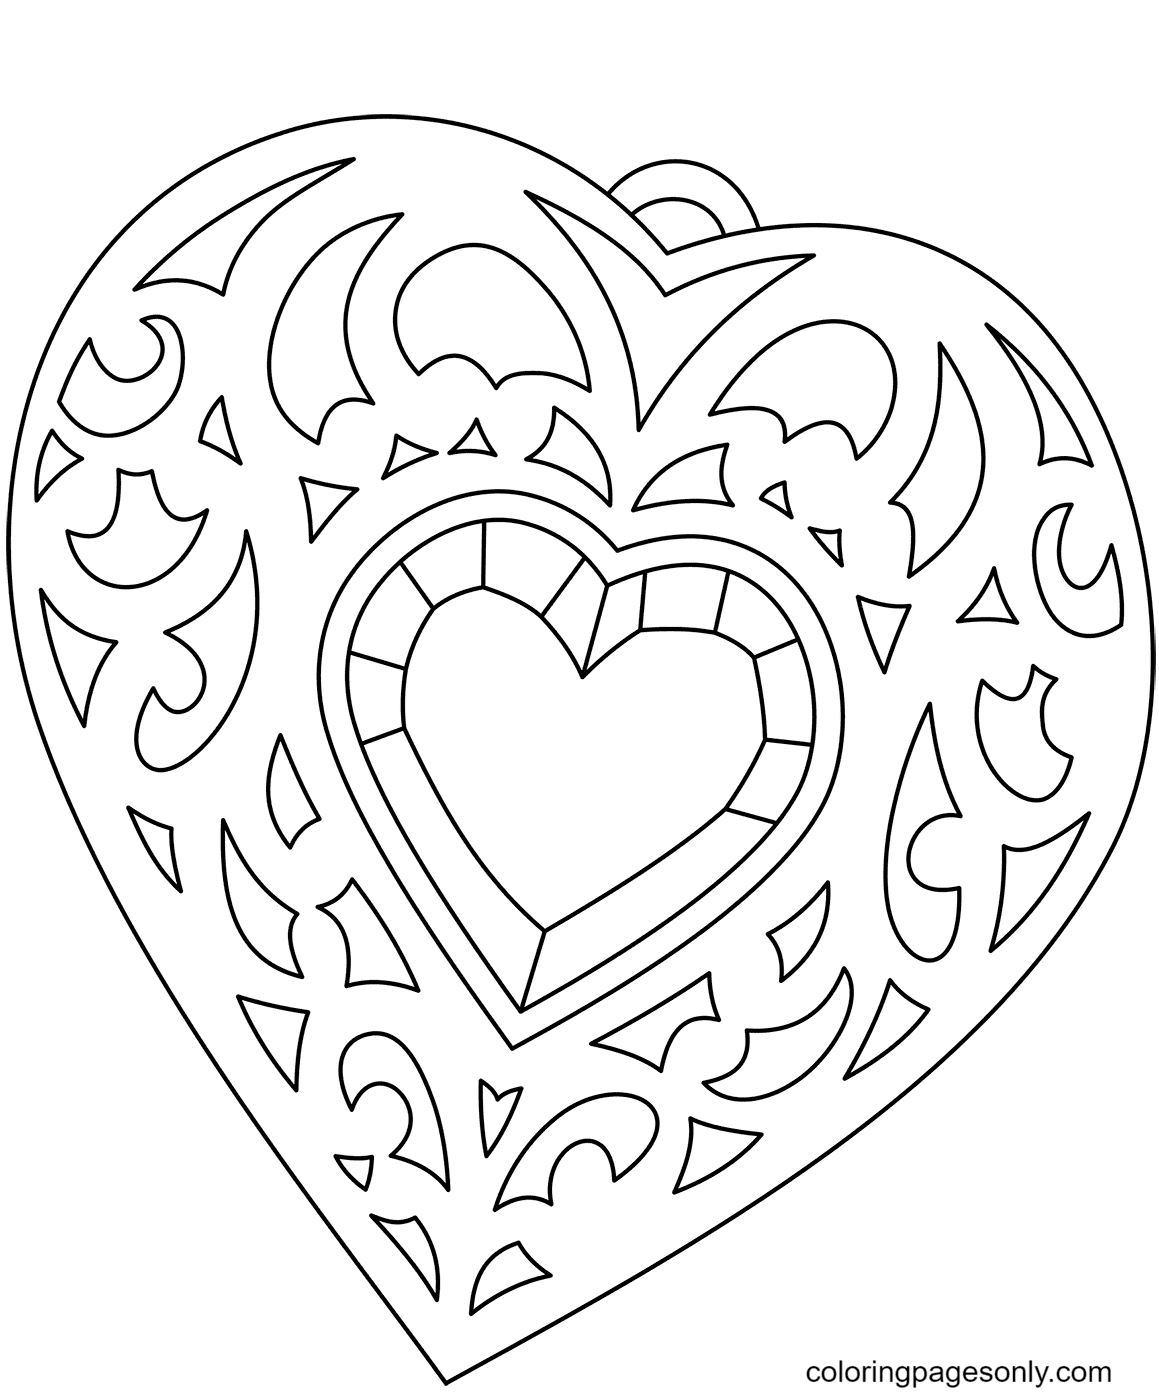 Heart Shaped Medallion Coloring Pages